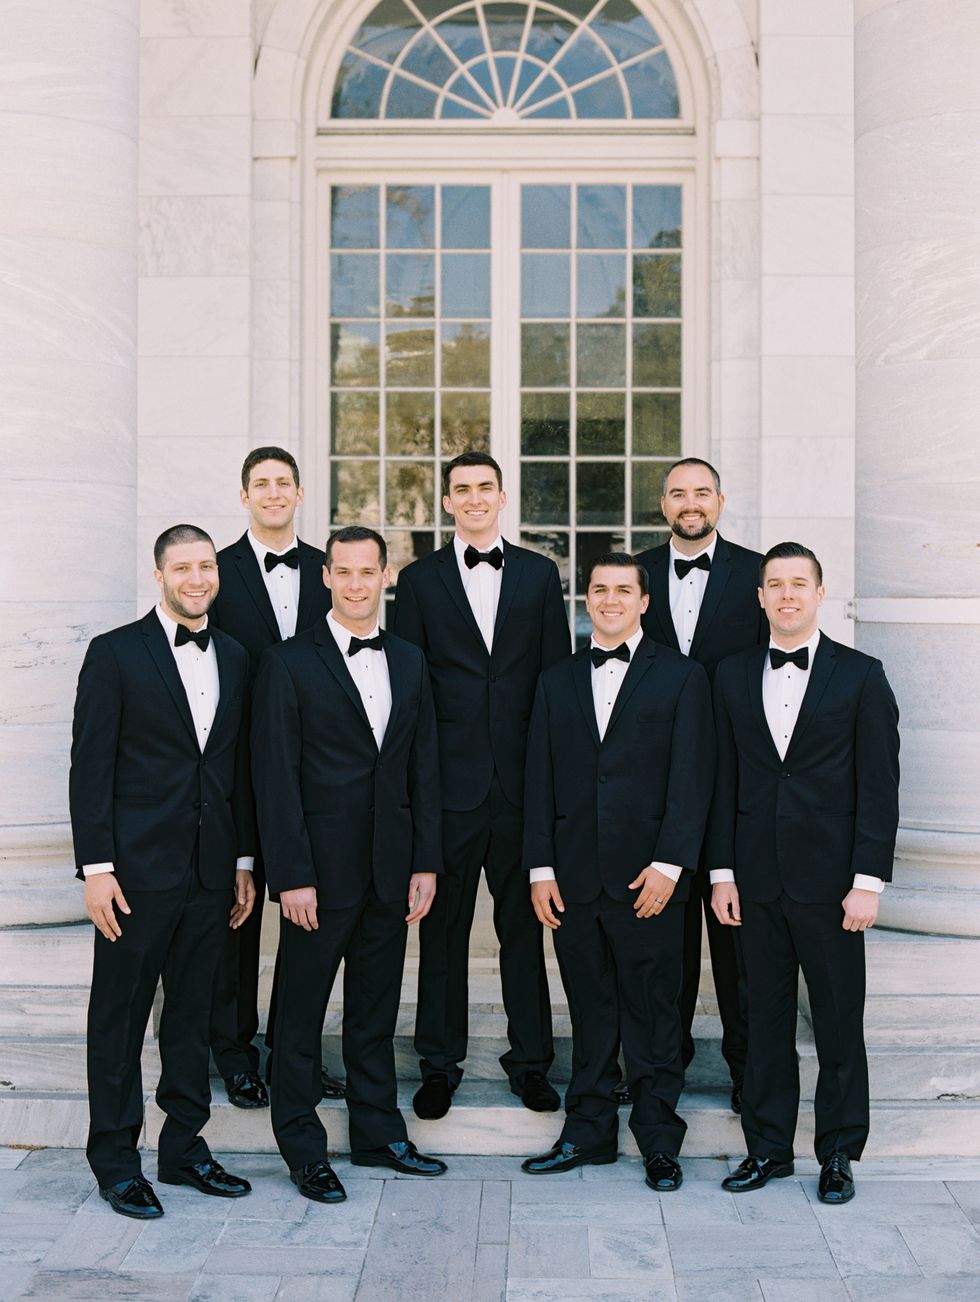 <p>Matt's groomsmen, including his brother, Arielle's two brothers, and his three best friends, looked sharp in their tuxedos from <a href="https://tuxedo.menswearhouse.com/verawang.do" target="_blank" tabindex="-1">Vera Wang</a>.</p>